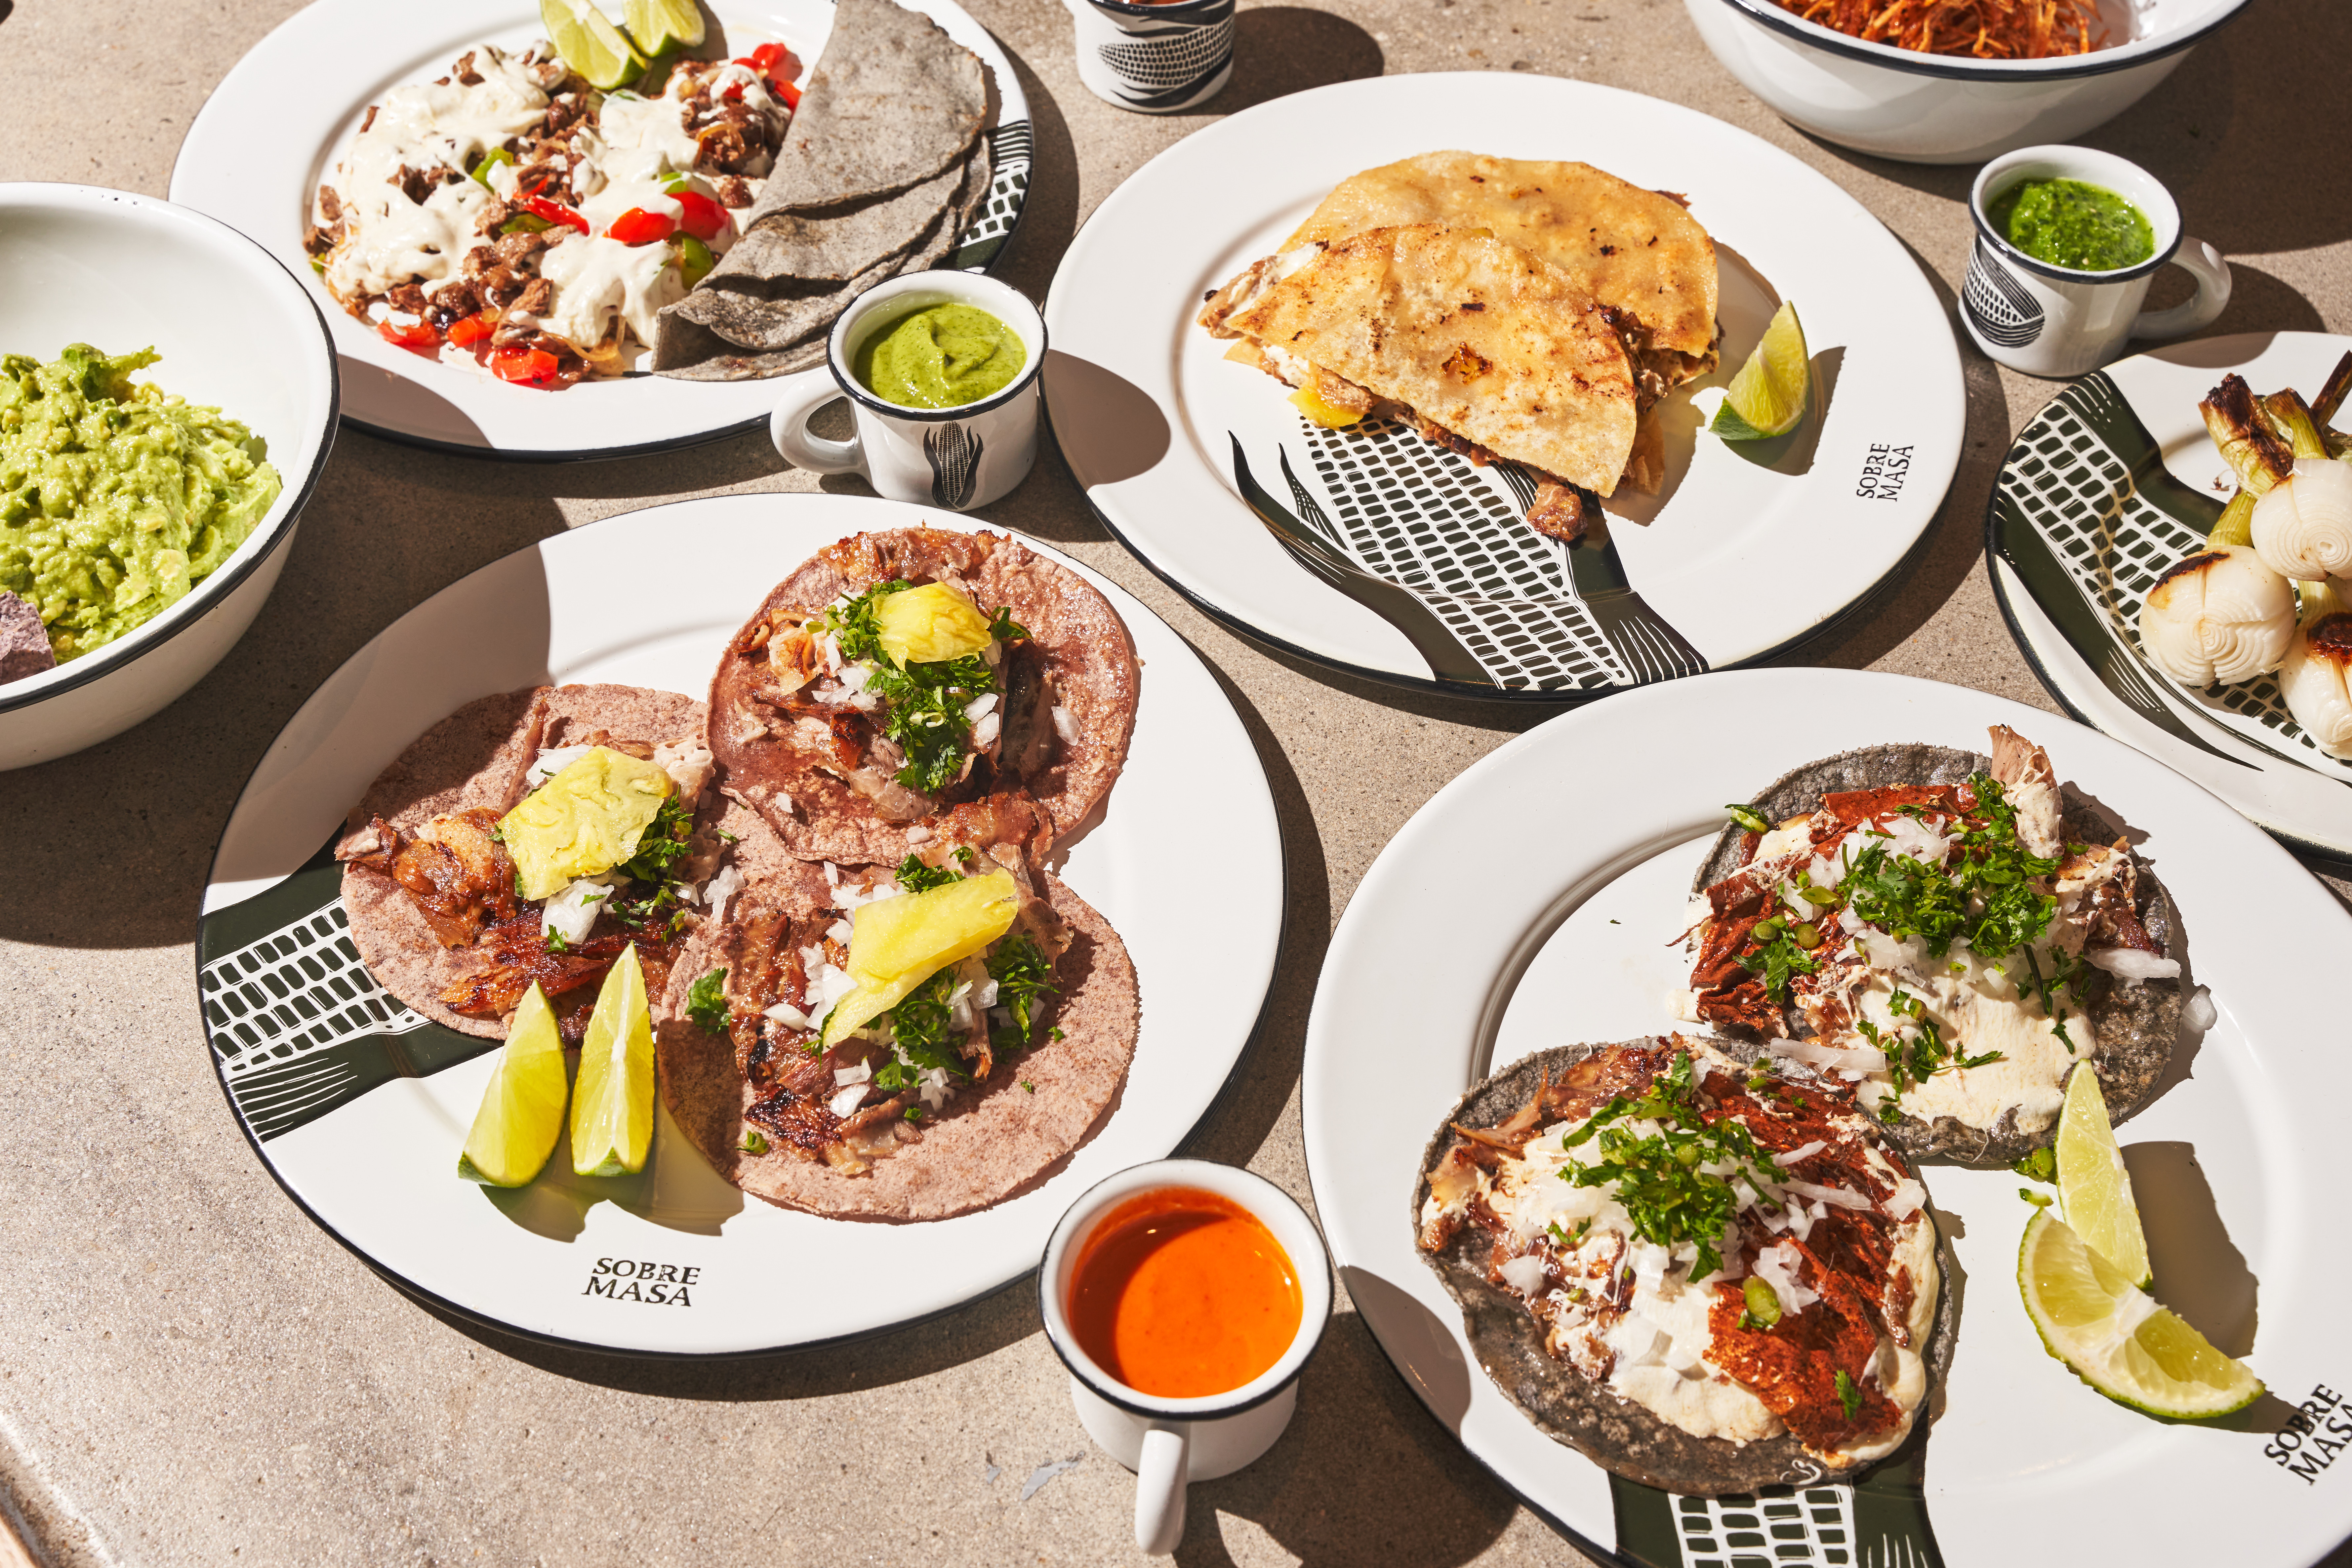 An assortment of tortilla dishes, including tacos and gringas, topped with meats and cheeses.